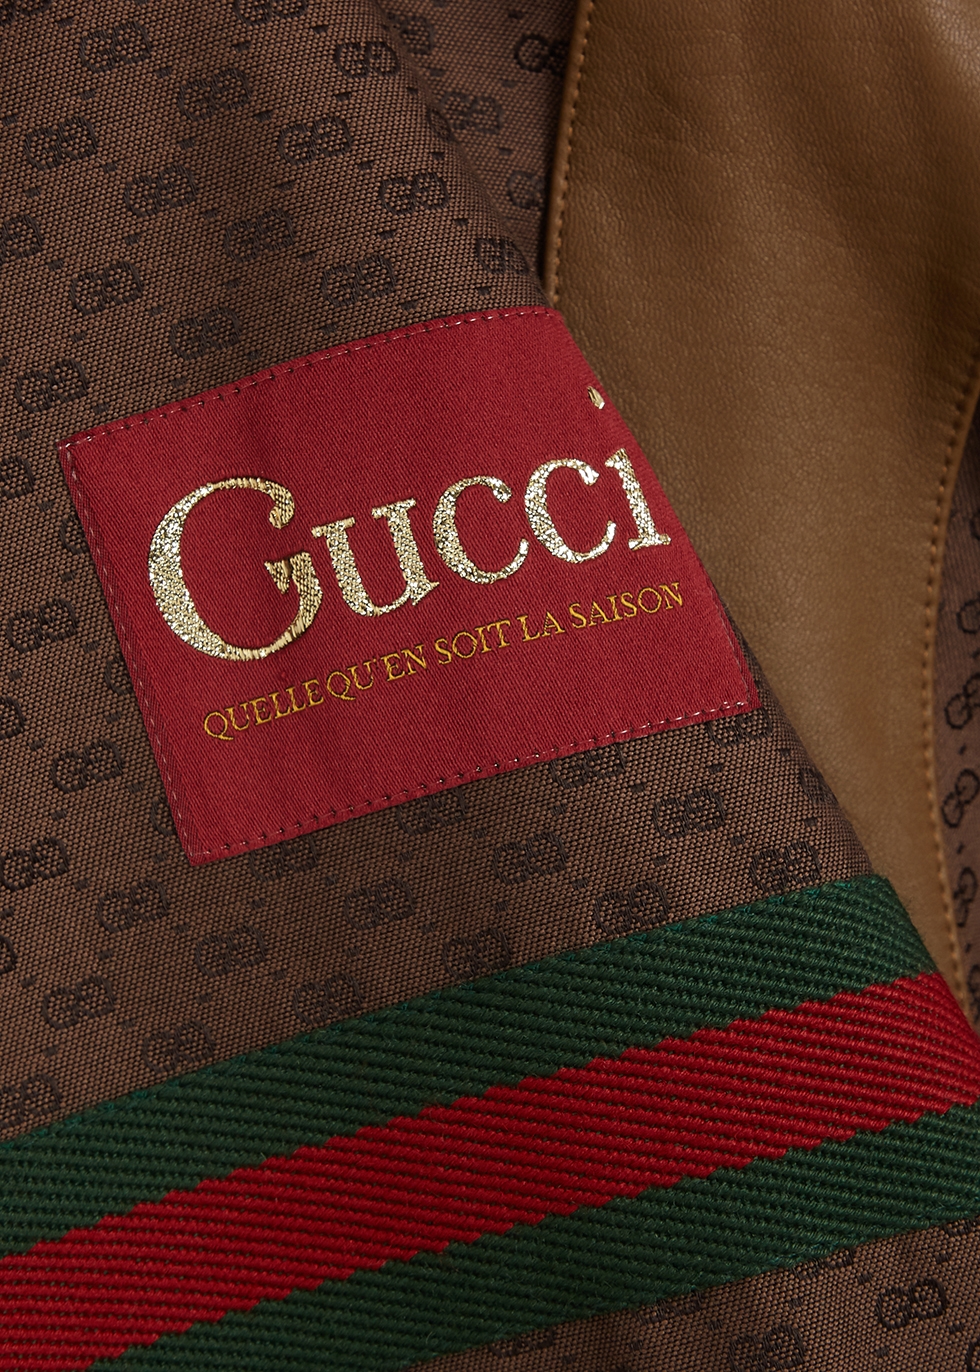 gg meaning gucci